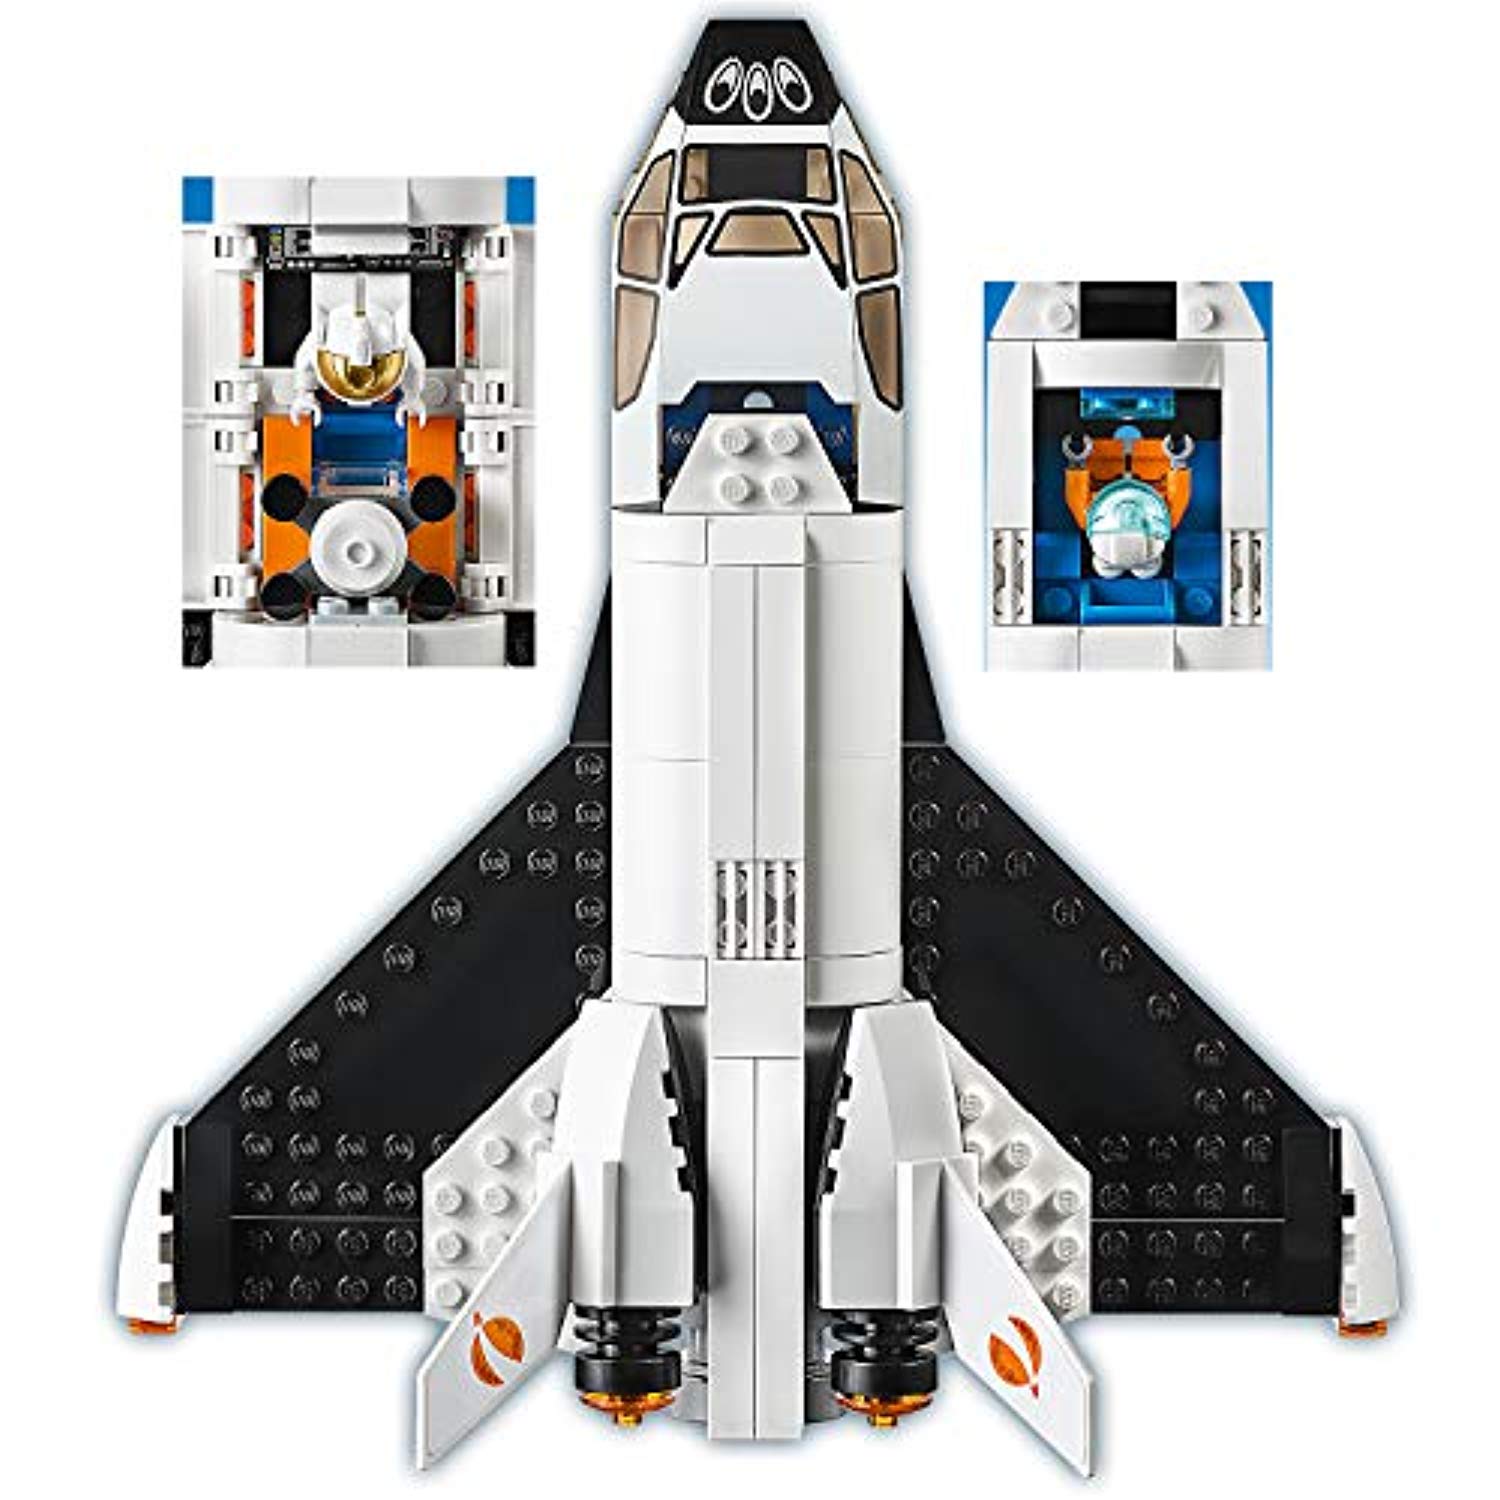 LEGO 60226 City Mars Research Shuttle Spaceship Construction Toys for Kids Inspired by NASA with Rover and Drone - Offer Games